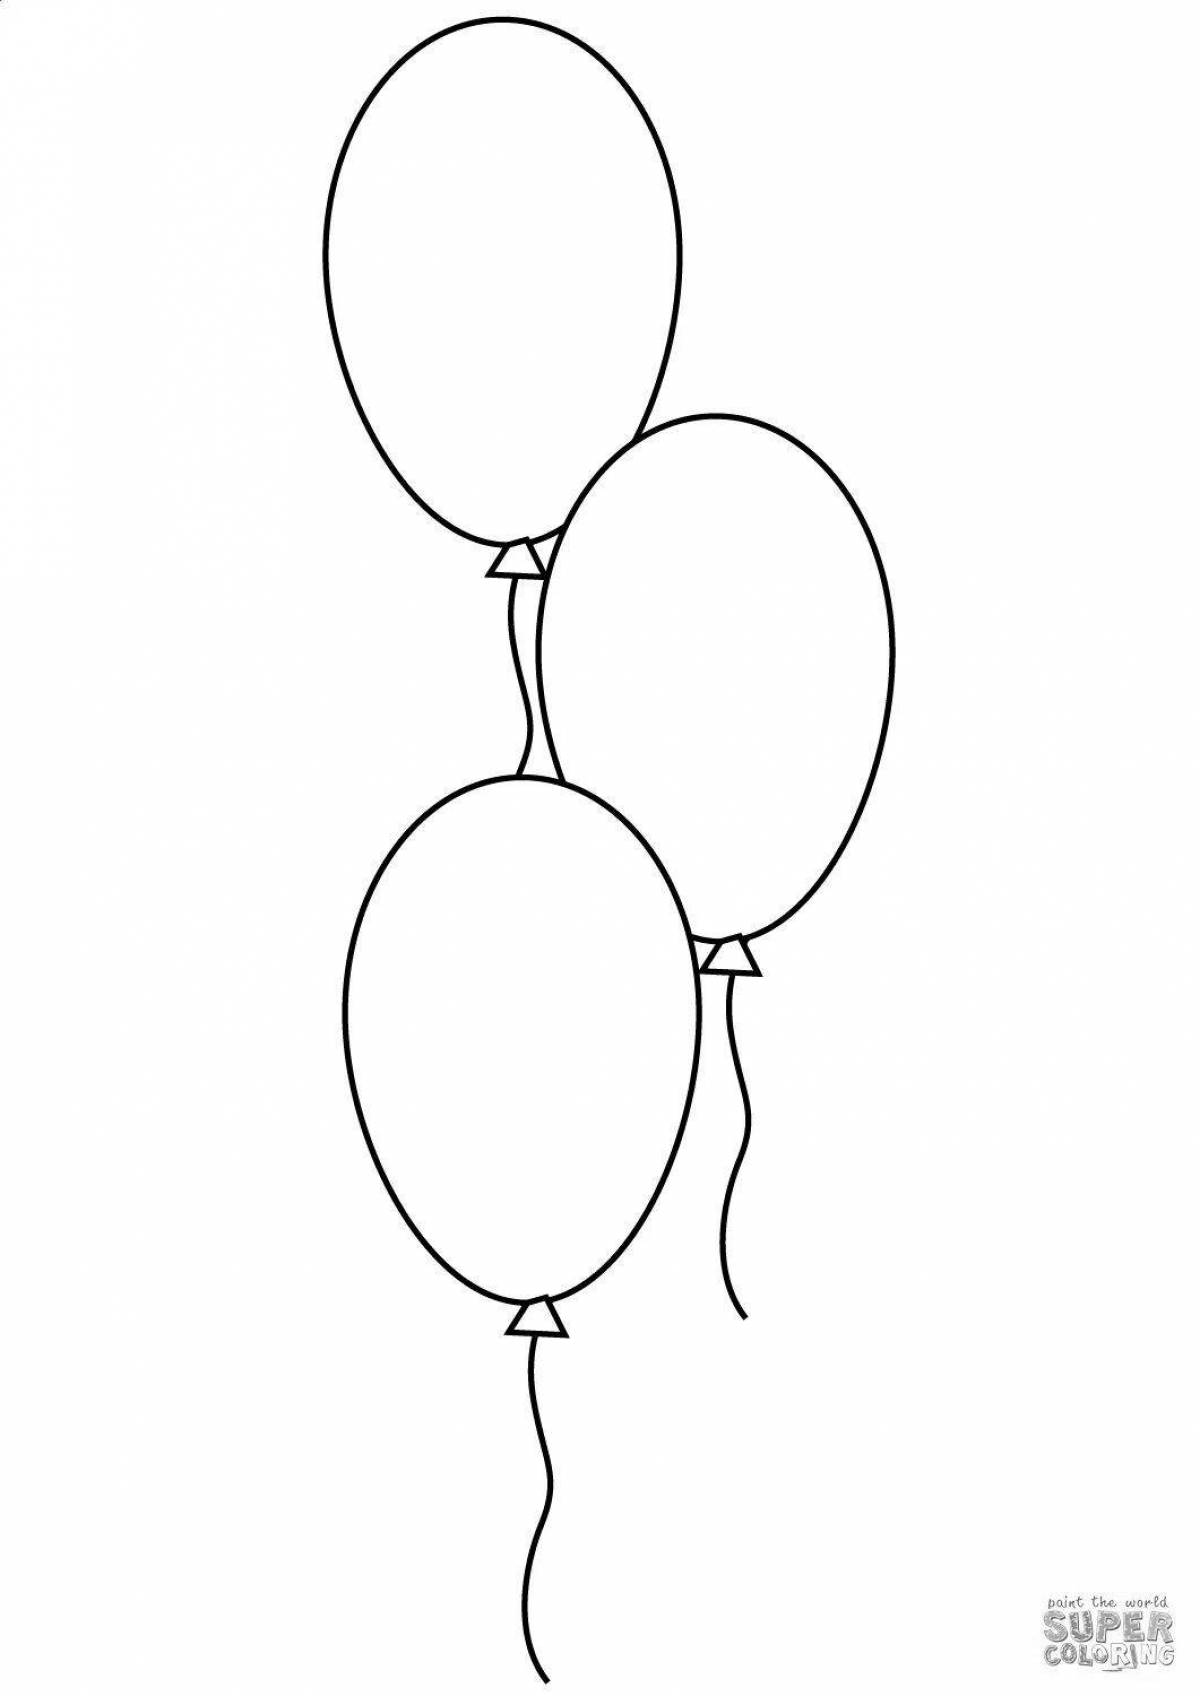 Exciting coloring pages with balloons for kids 2-3 years old